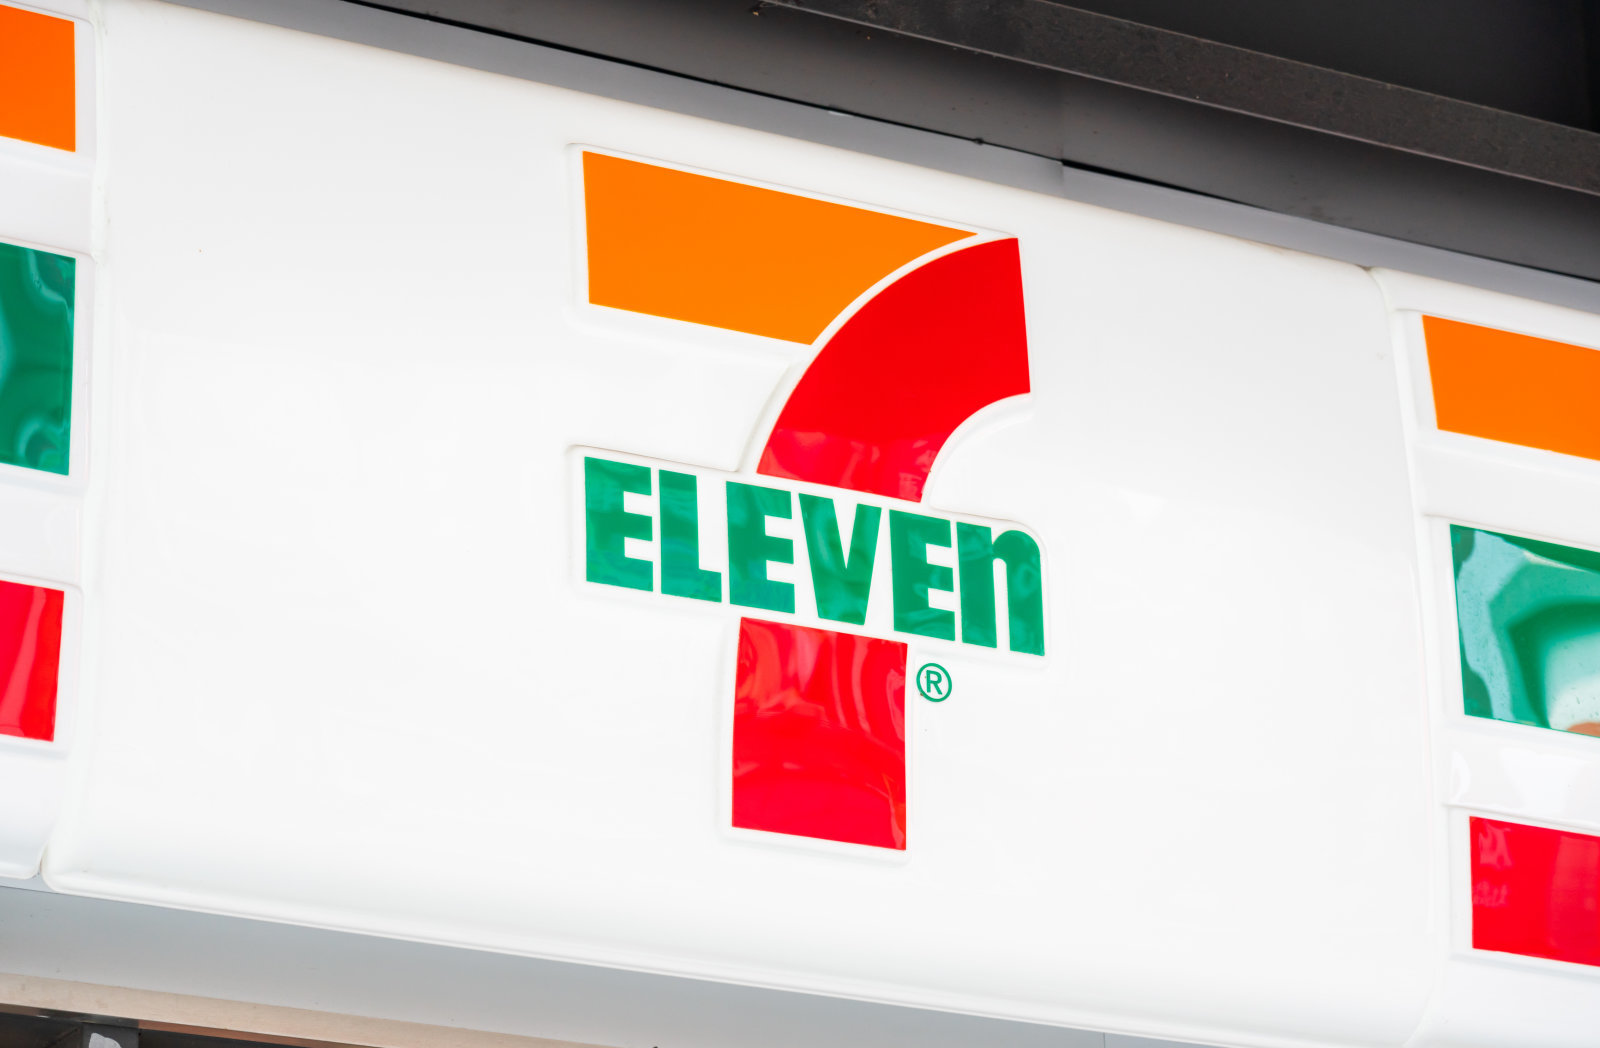 SHENZHEN, GUANGDONG, CHINA - 2019/10/05: Japanese-U.S. international convenience store chain 7-Eleven logo seen in Shenzhen. (Photo by Alex Tai/SOPA Images/LightRocket via Getty Images)